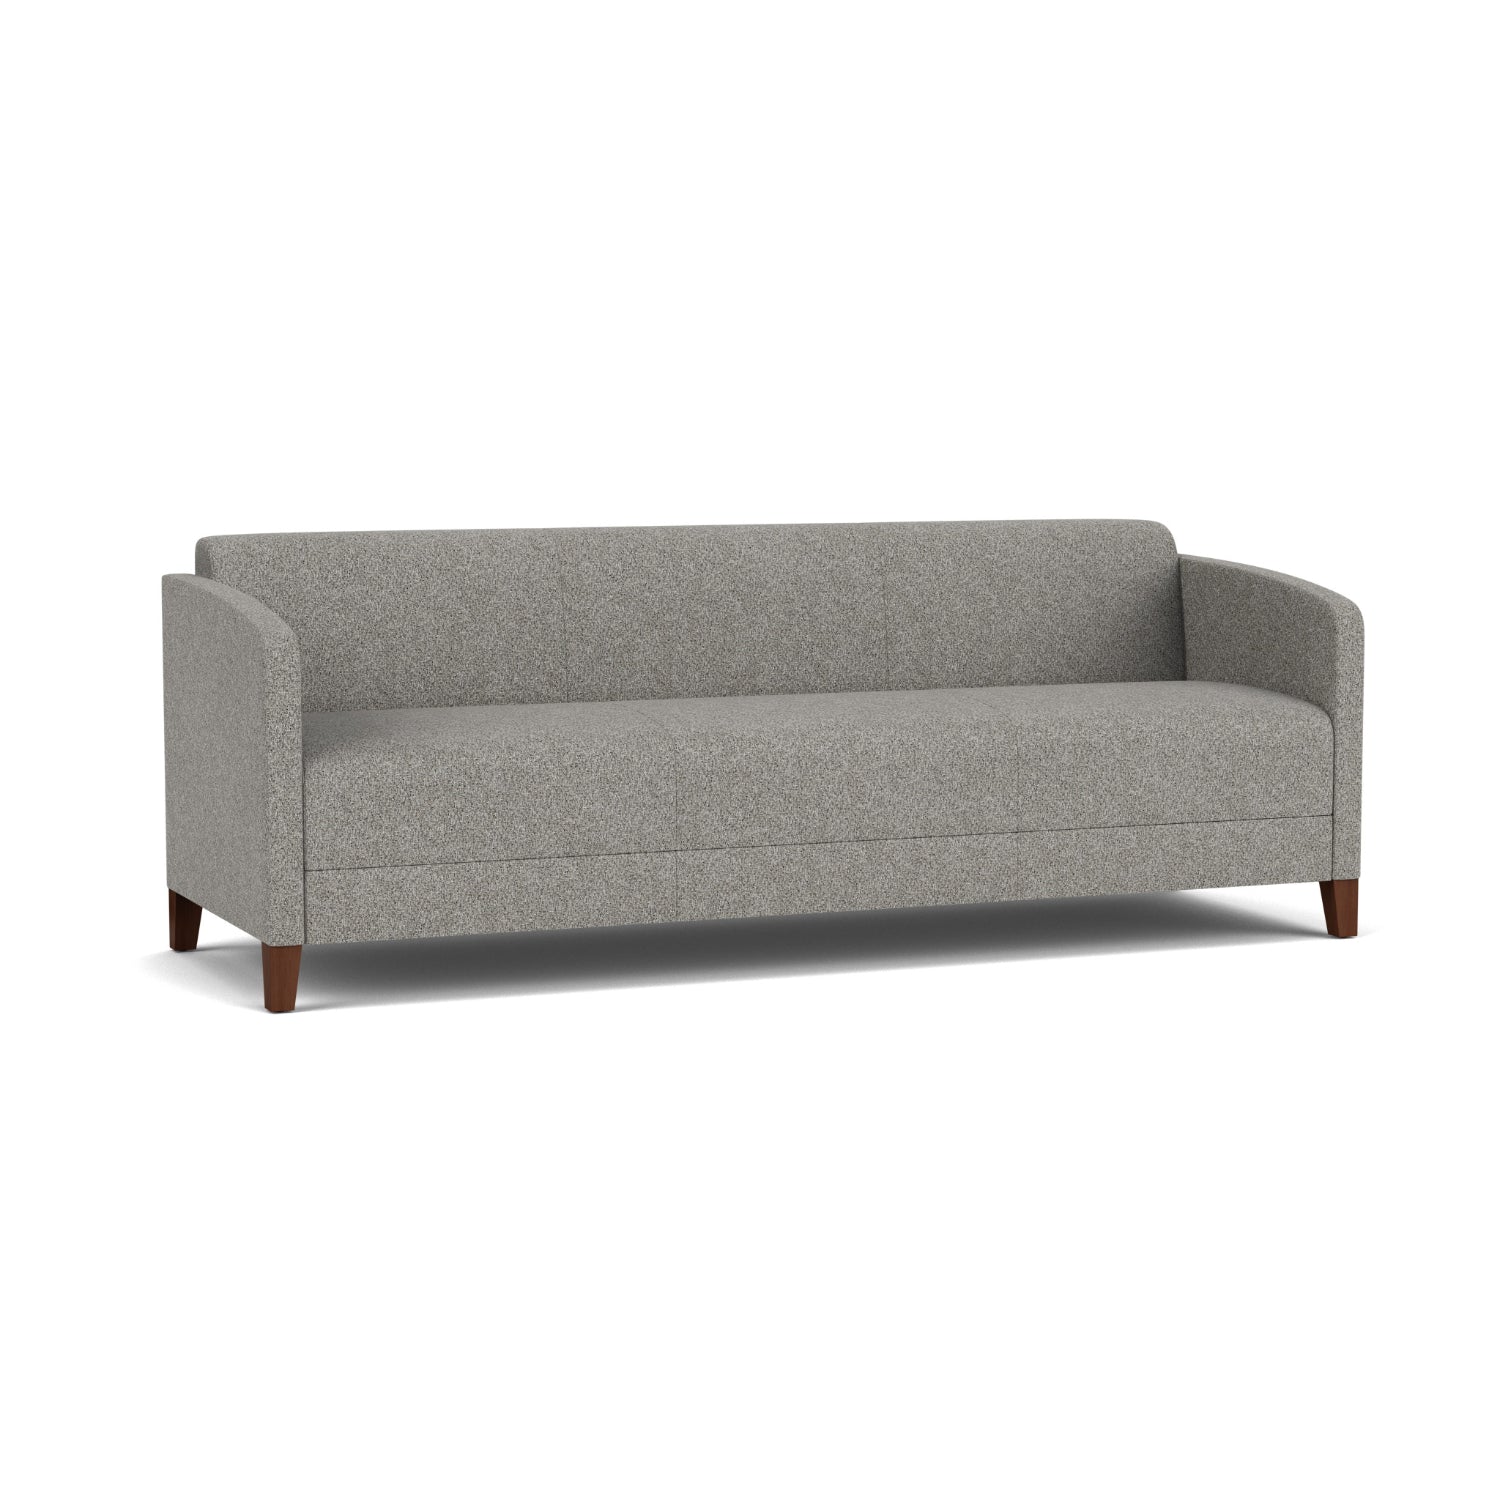 Fremont Collection Reception Seating, Sofa, Standard Fabric Upholstery, FREE SHIPPING